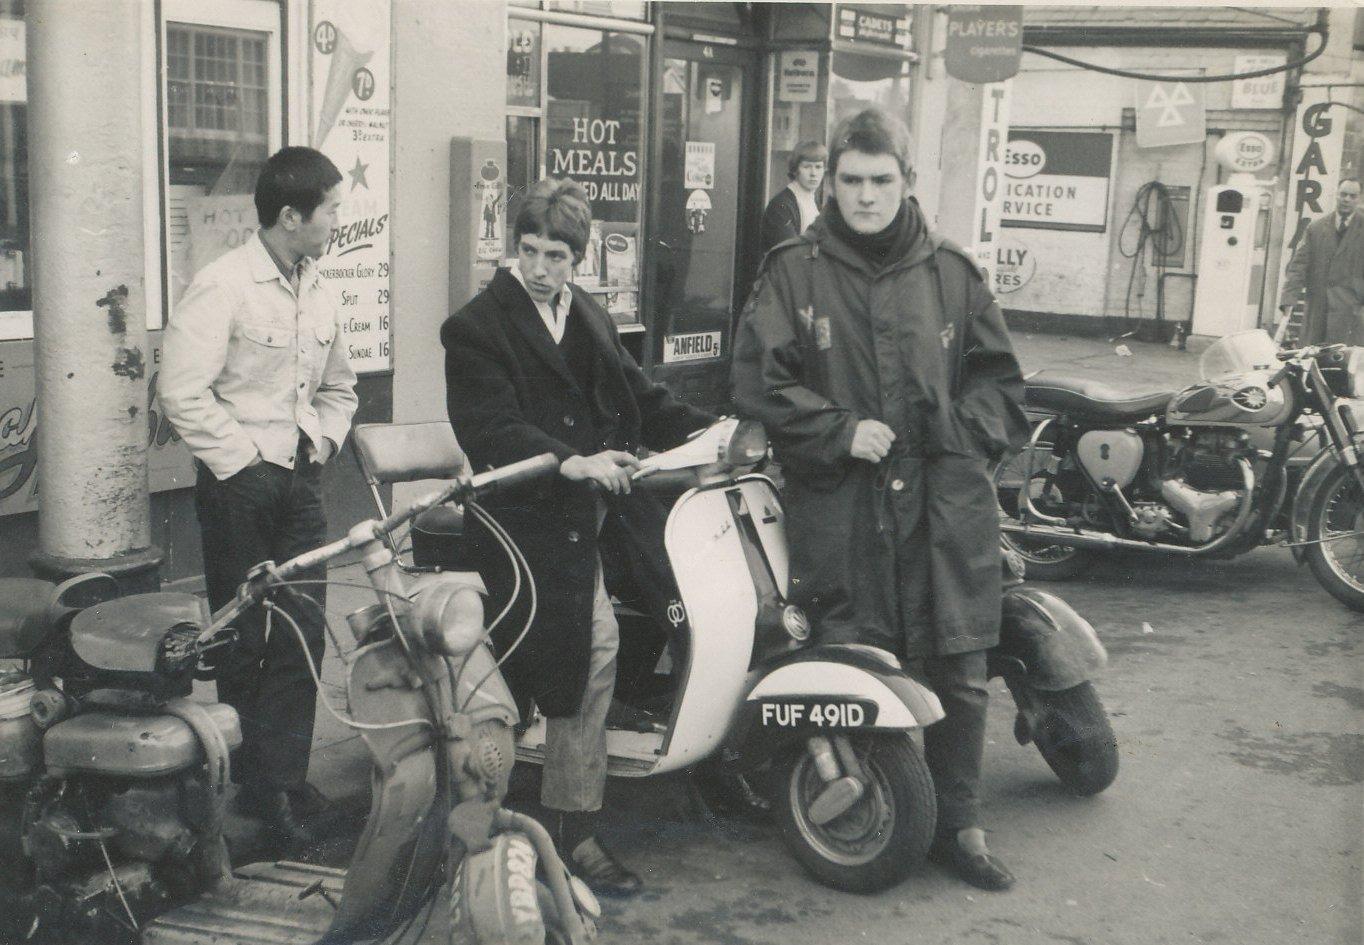 Outside the Clifton Cafe on February 4, 1967, from left, Tom Lee, Brian 'Bunny' Silcock and Ian Turner